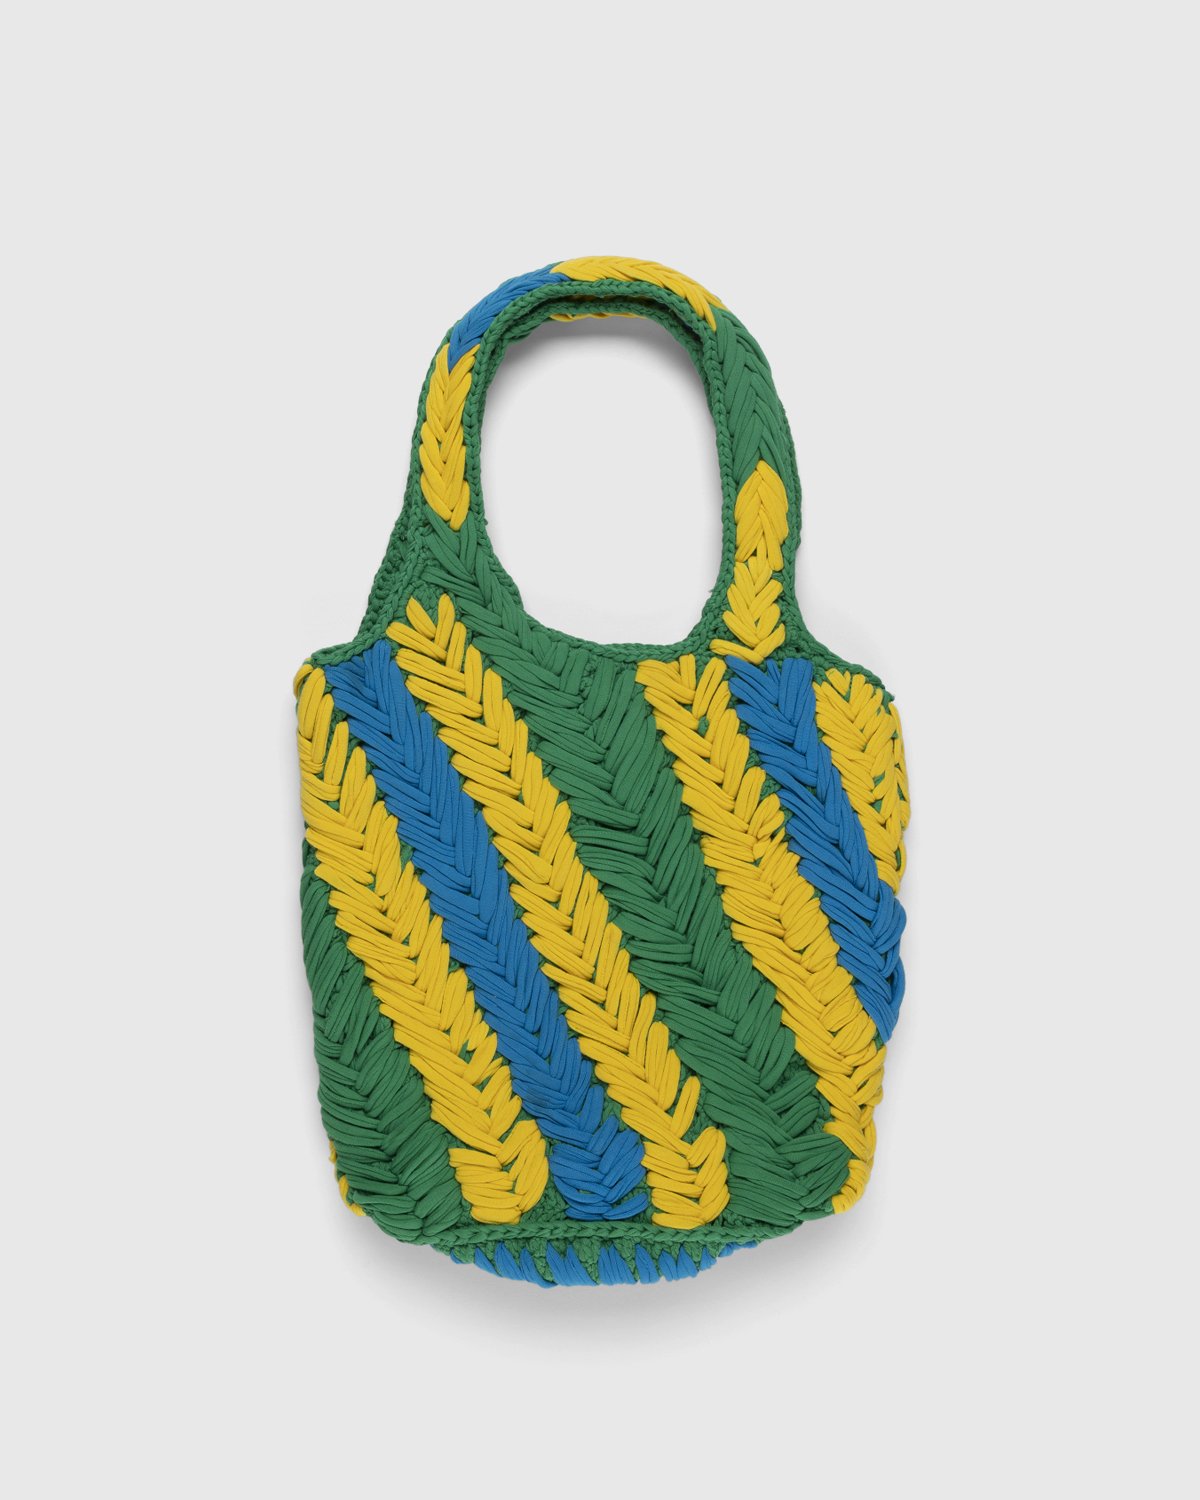 J.W. Anderson - Knitted Shopper Green/Yellow/Blue - Accessories - Multi - Image 2